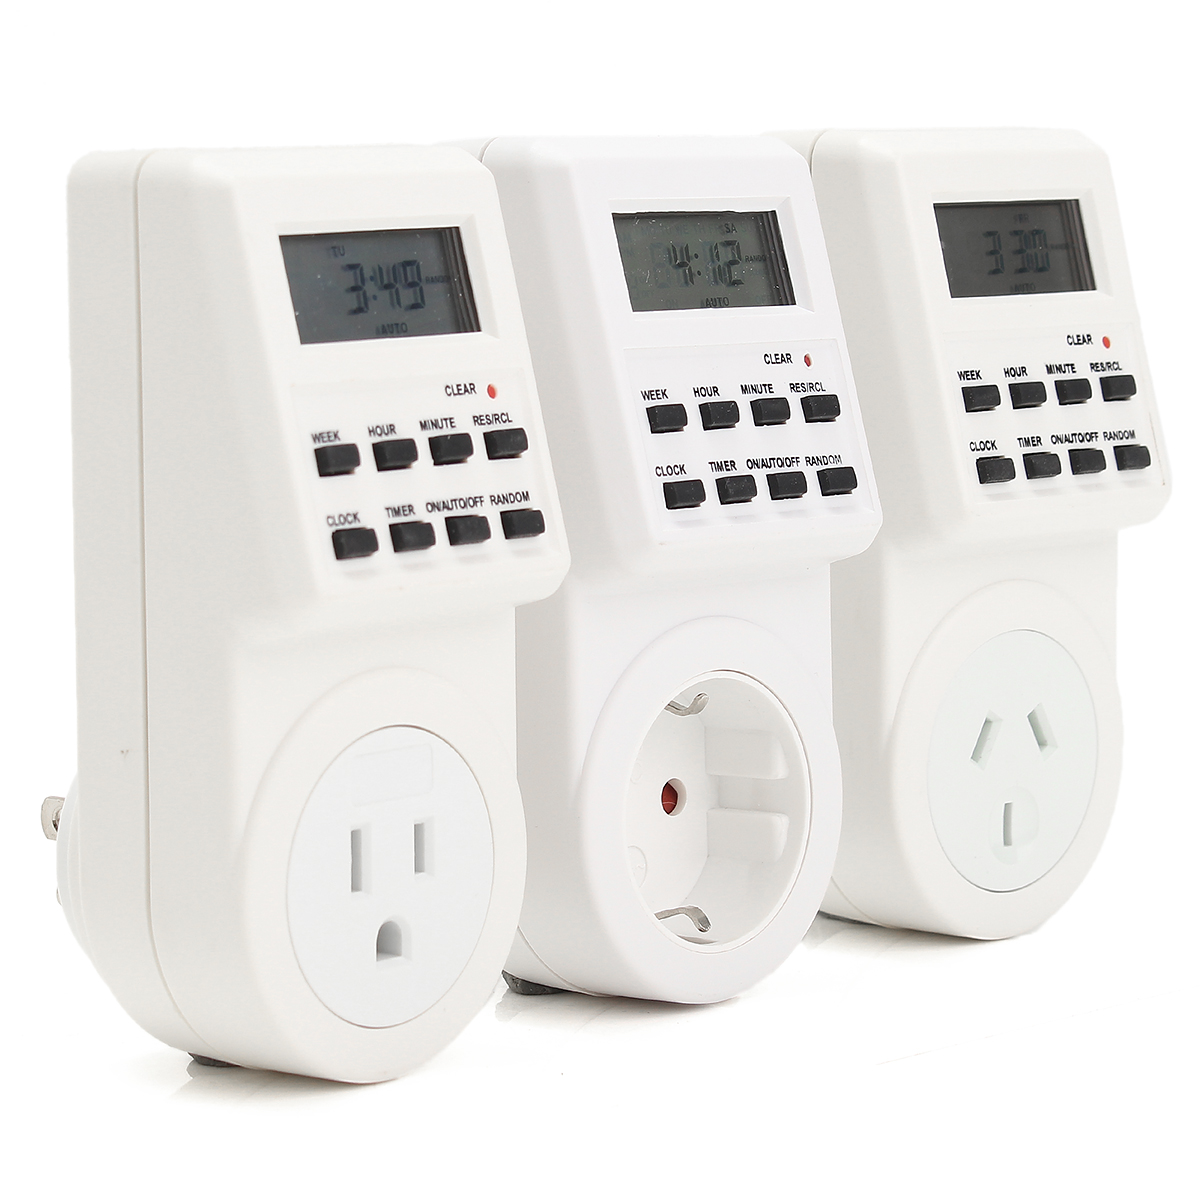 120V-Digital-Programmable-1224-Hour-Timer-LCD-Plug-in-Wall-Socket-Switch-Energy-saving-1287710-1